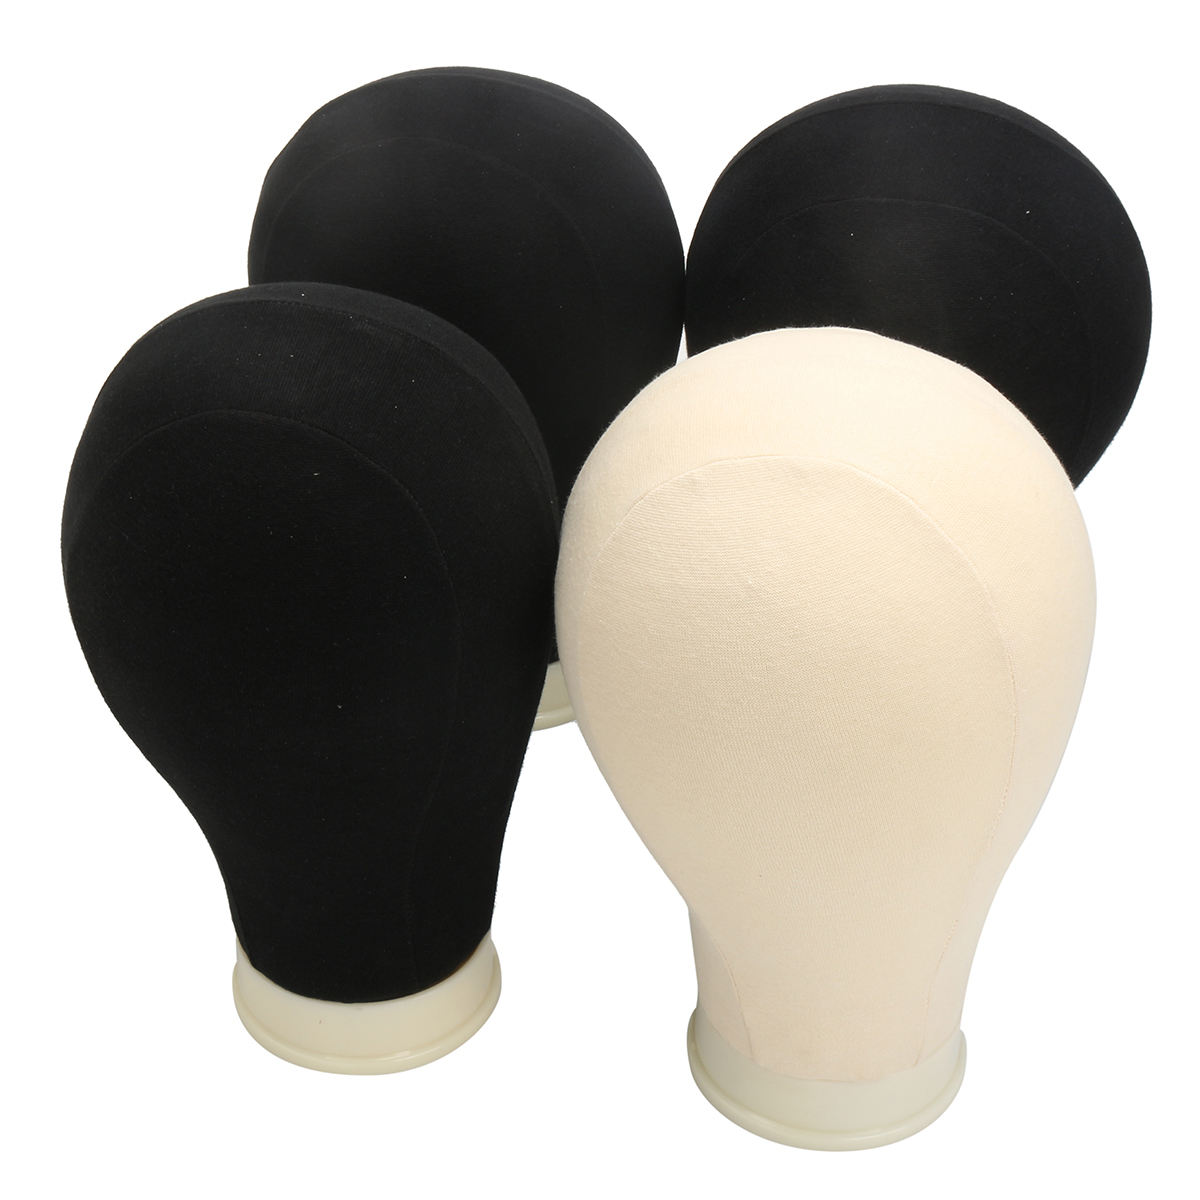 20-25-Canvas-Block-Head-Set-with-Mount-Hole-Plate-Mannequin-Model-Cap-Wigs-Jewelry-Display-Stand-1445404-1